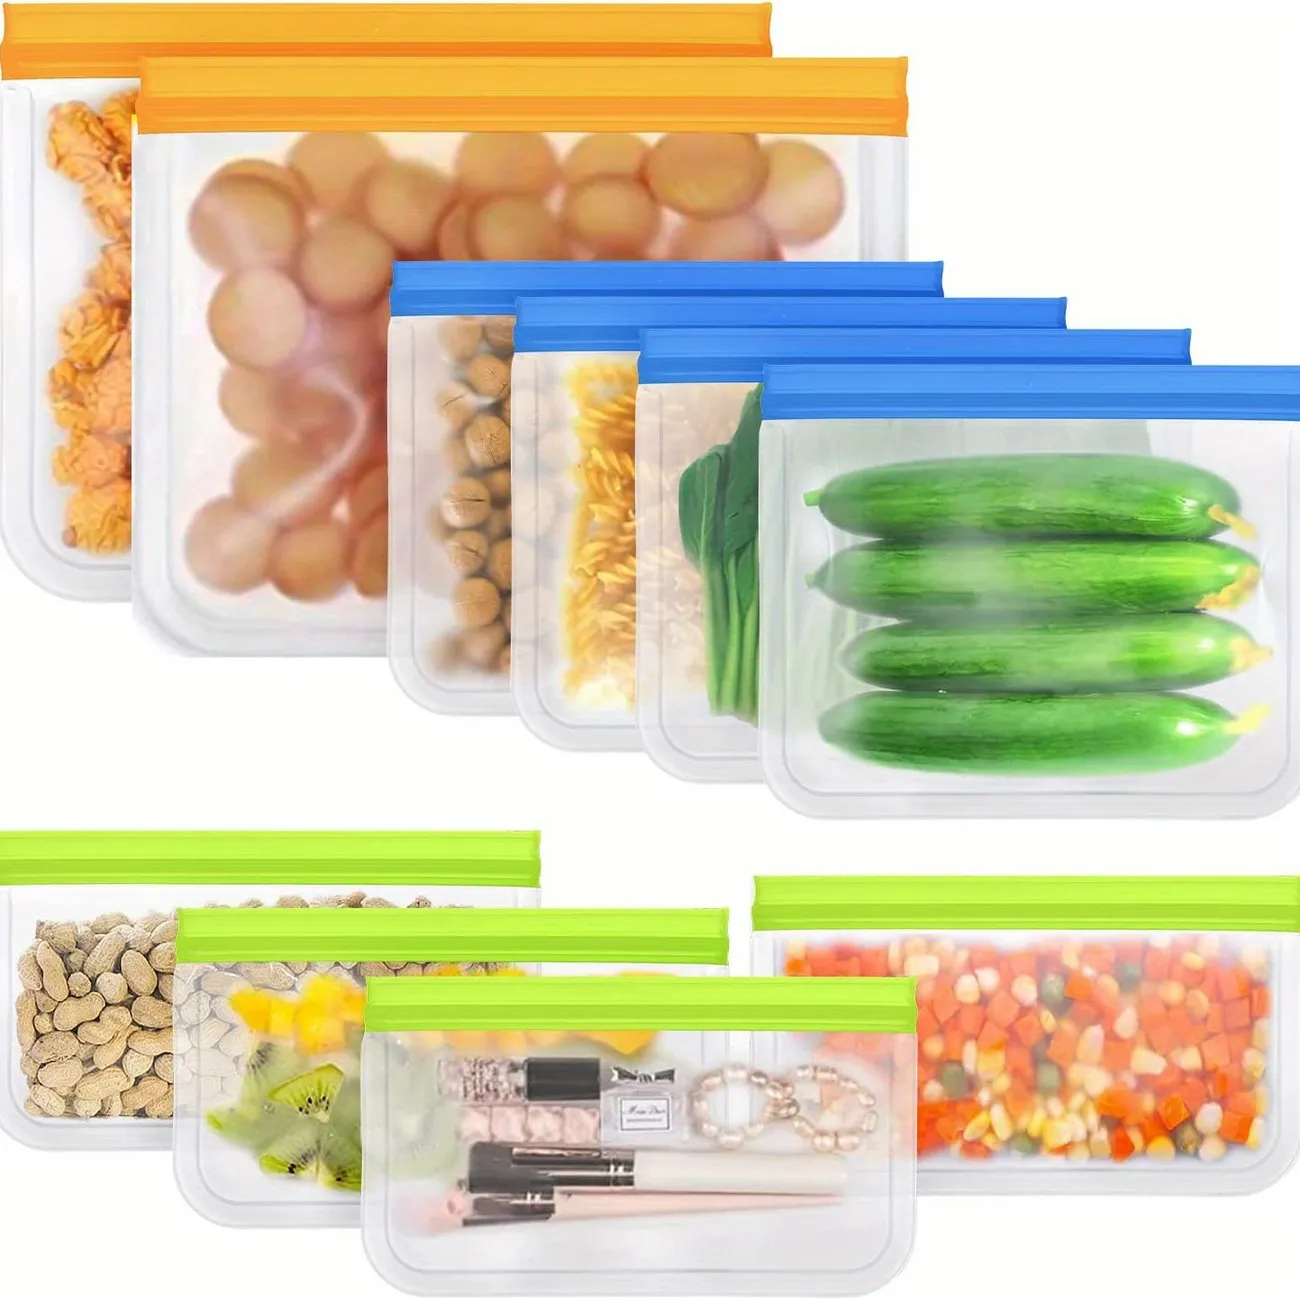 10pcs BPA-Free Reusable Food Storage Bags - Leakproof Snack and Sandwich Bags for Lunch, Marinating, and Keeping Food Fresh